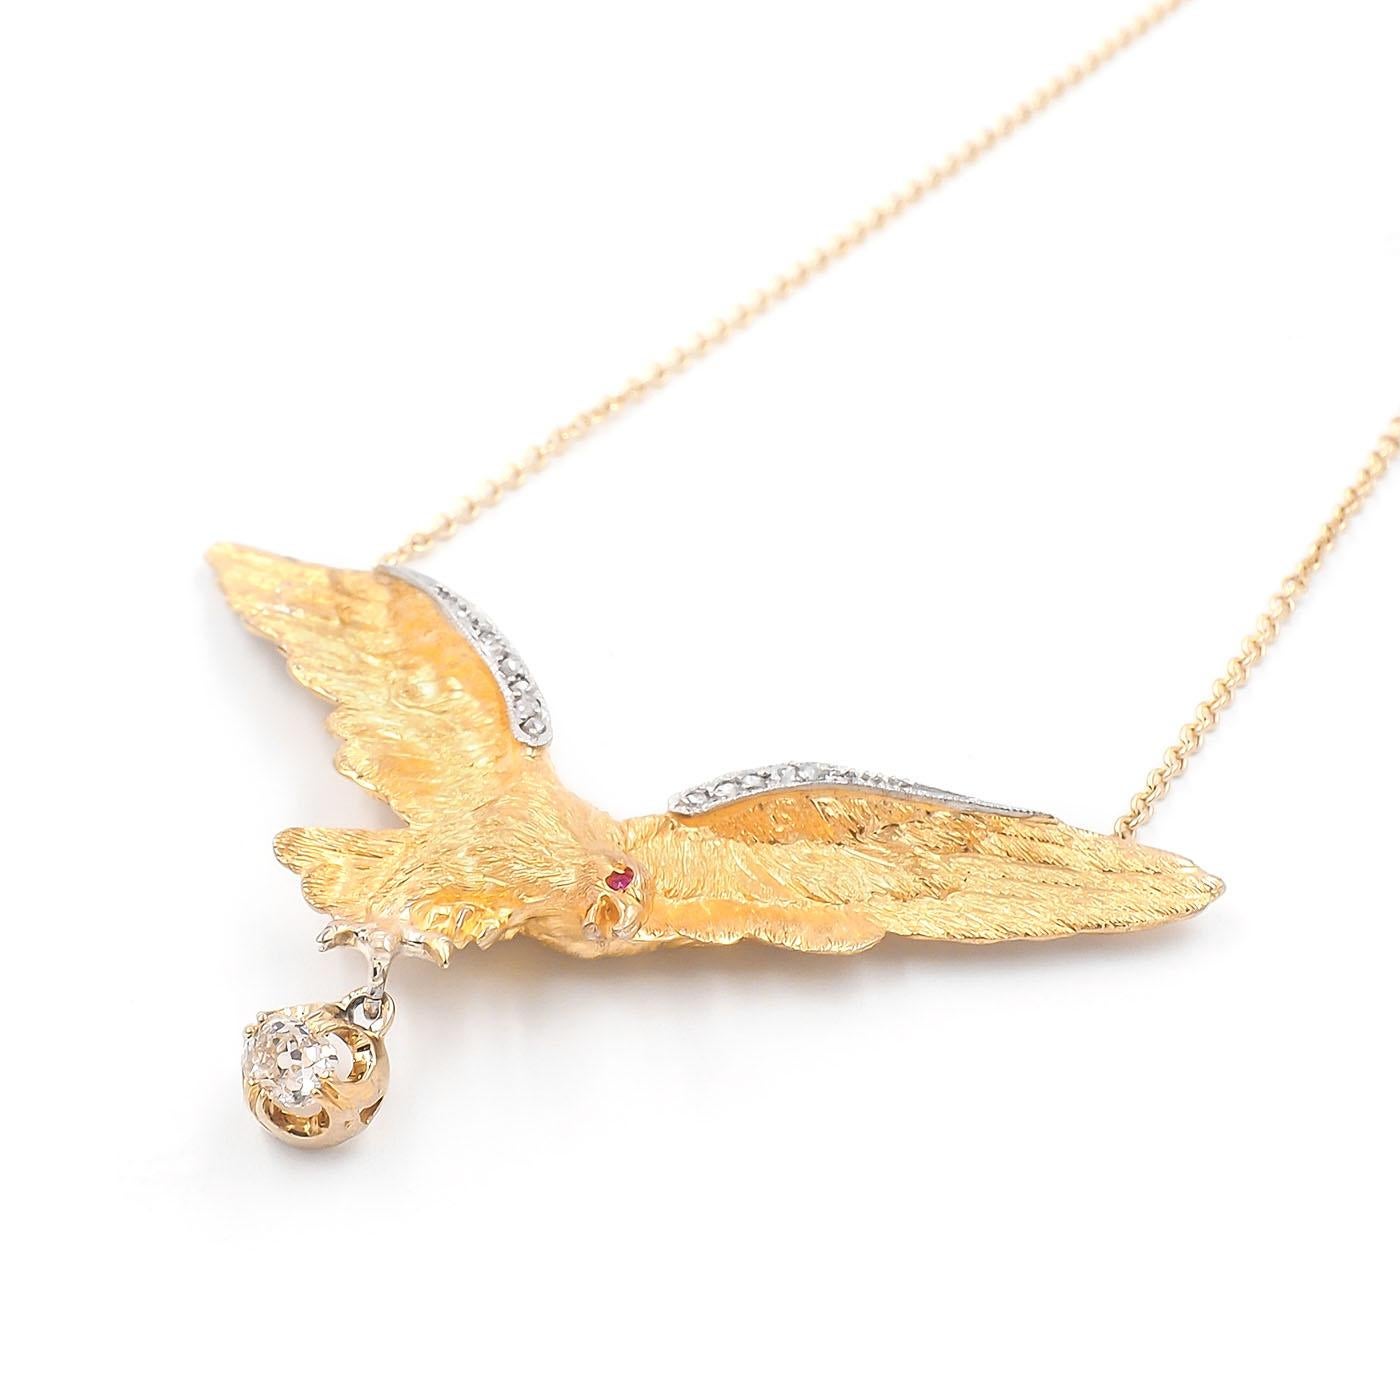 Edwardian era Eagle Pendant Necklace with Old Mine Cut Diamond Drop composed of 18k yellow gold & platinum. Featuring a three dimensional 18k yellow gold eagle with its textured wings spread, dangling an Old Mine Cut diamond from its talons. With a